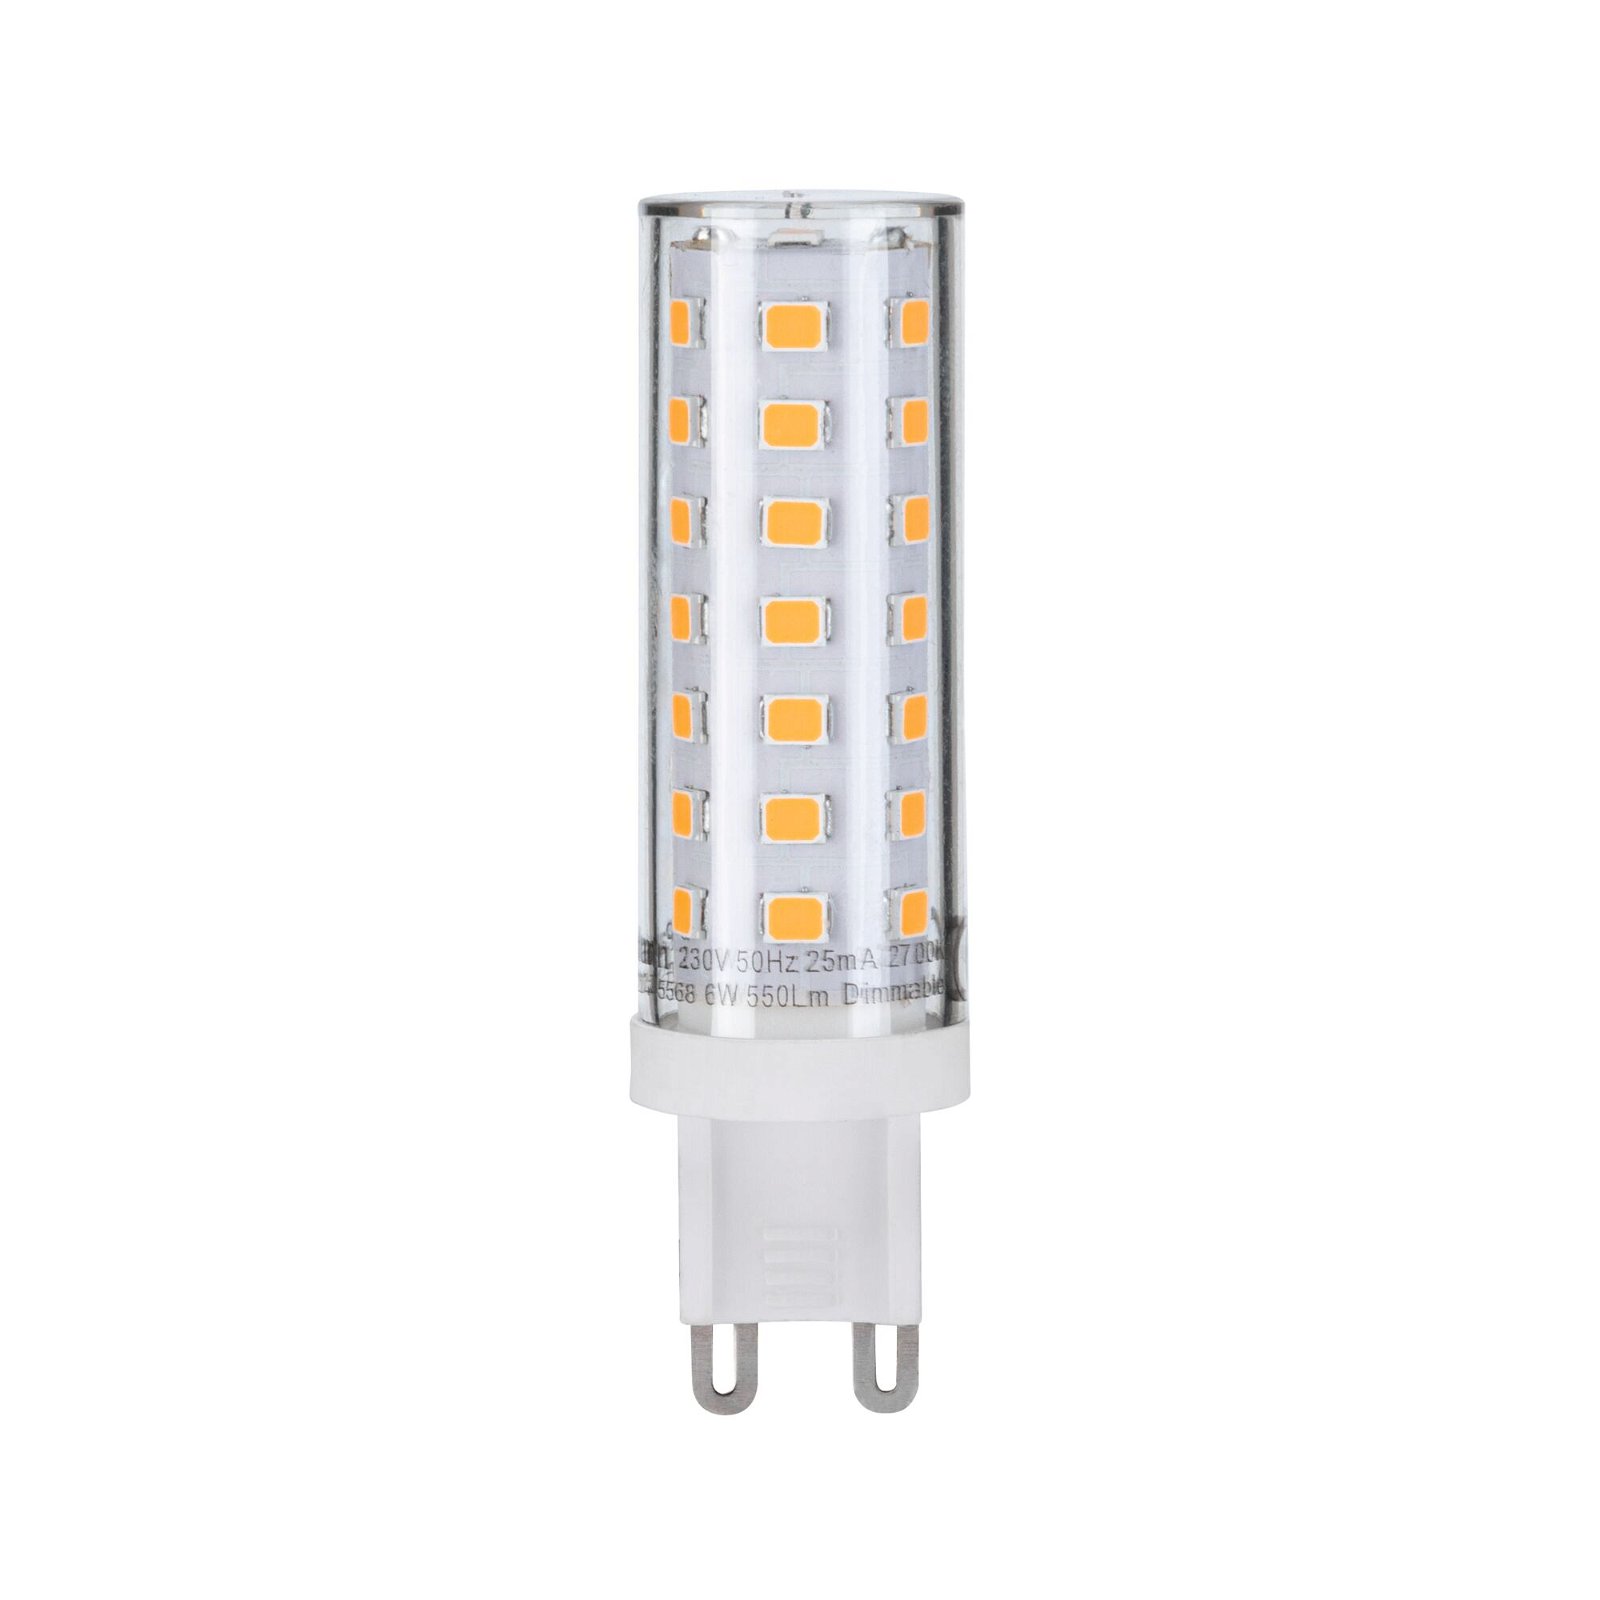 230 V Standard LED Pin base G9 1 pack 550lm 6W 2700K dimmable Clear